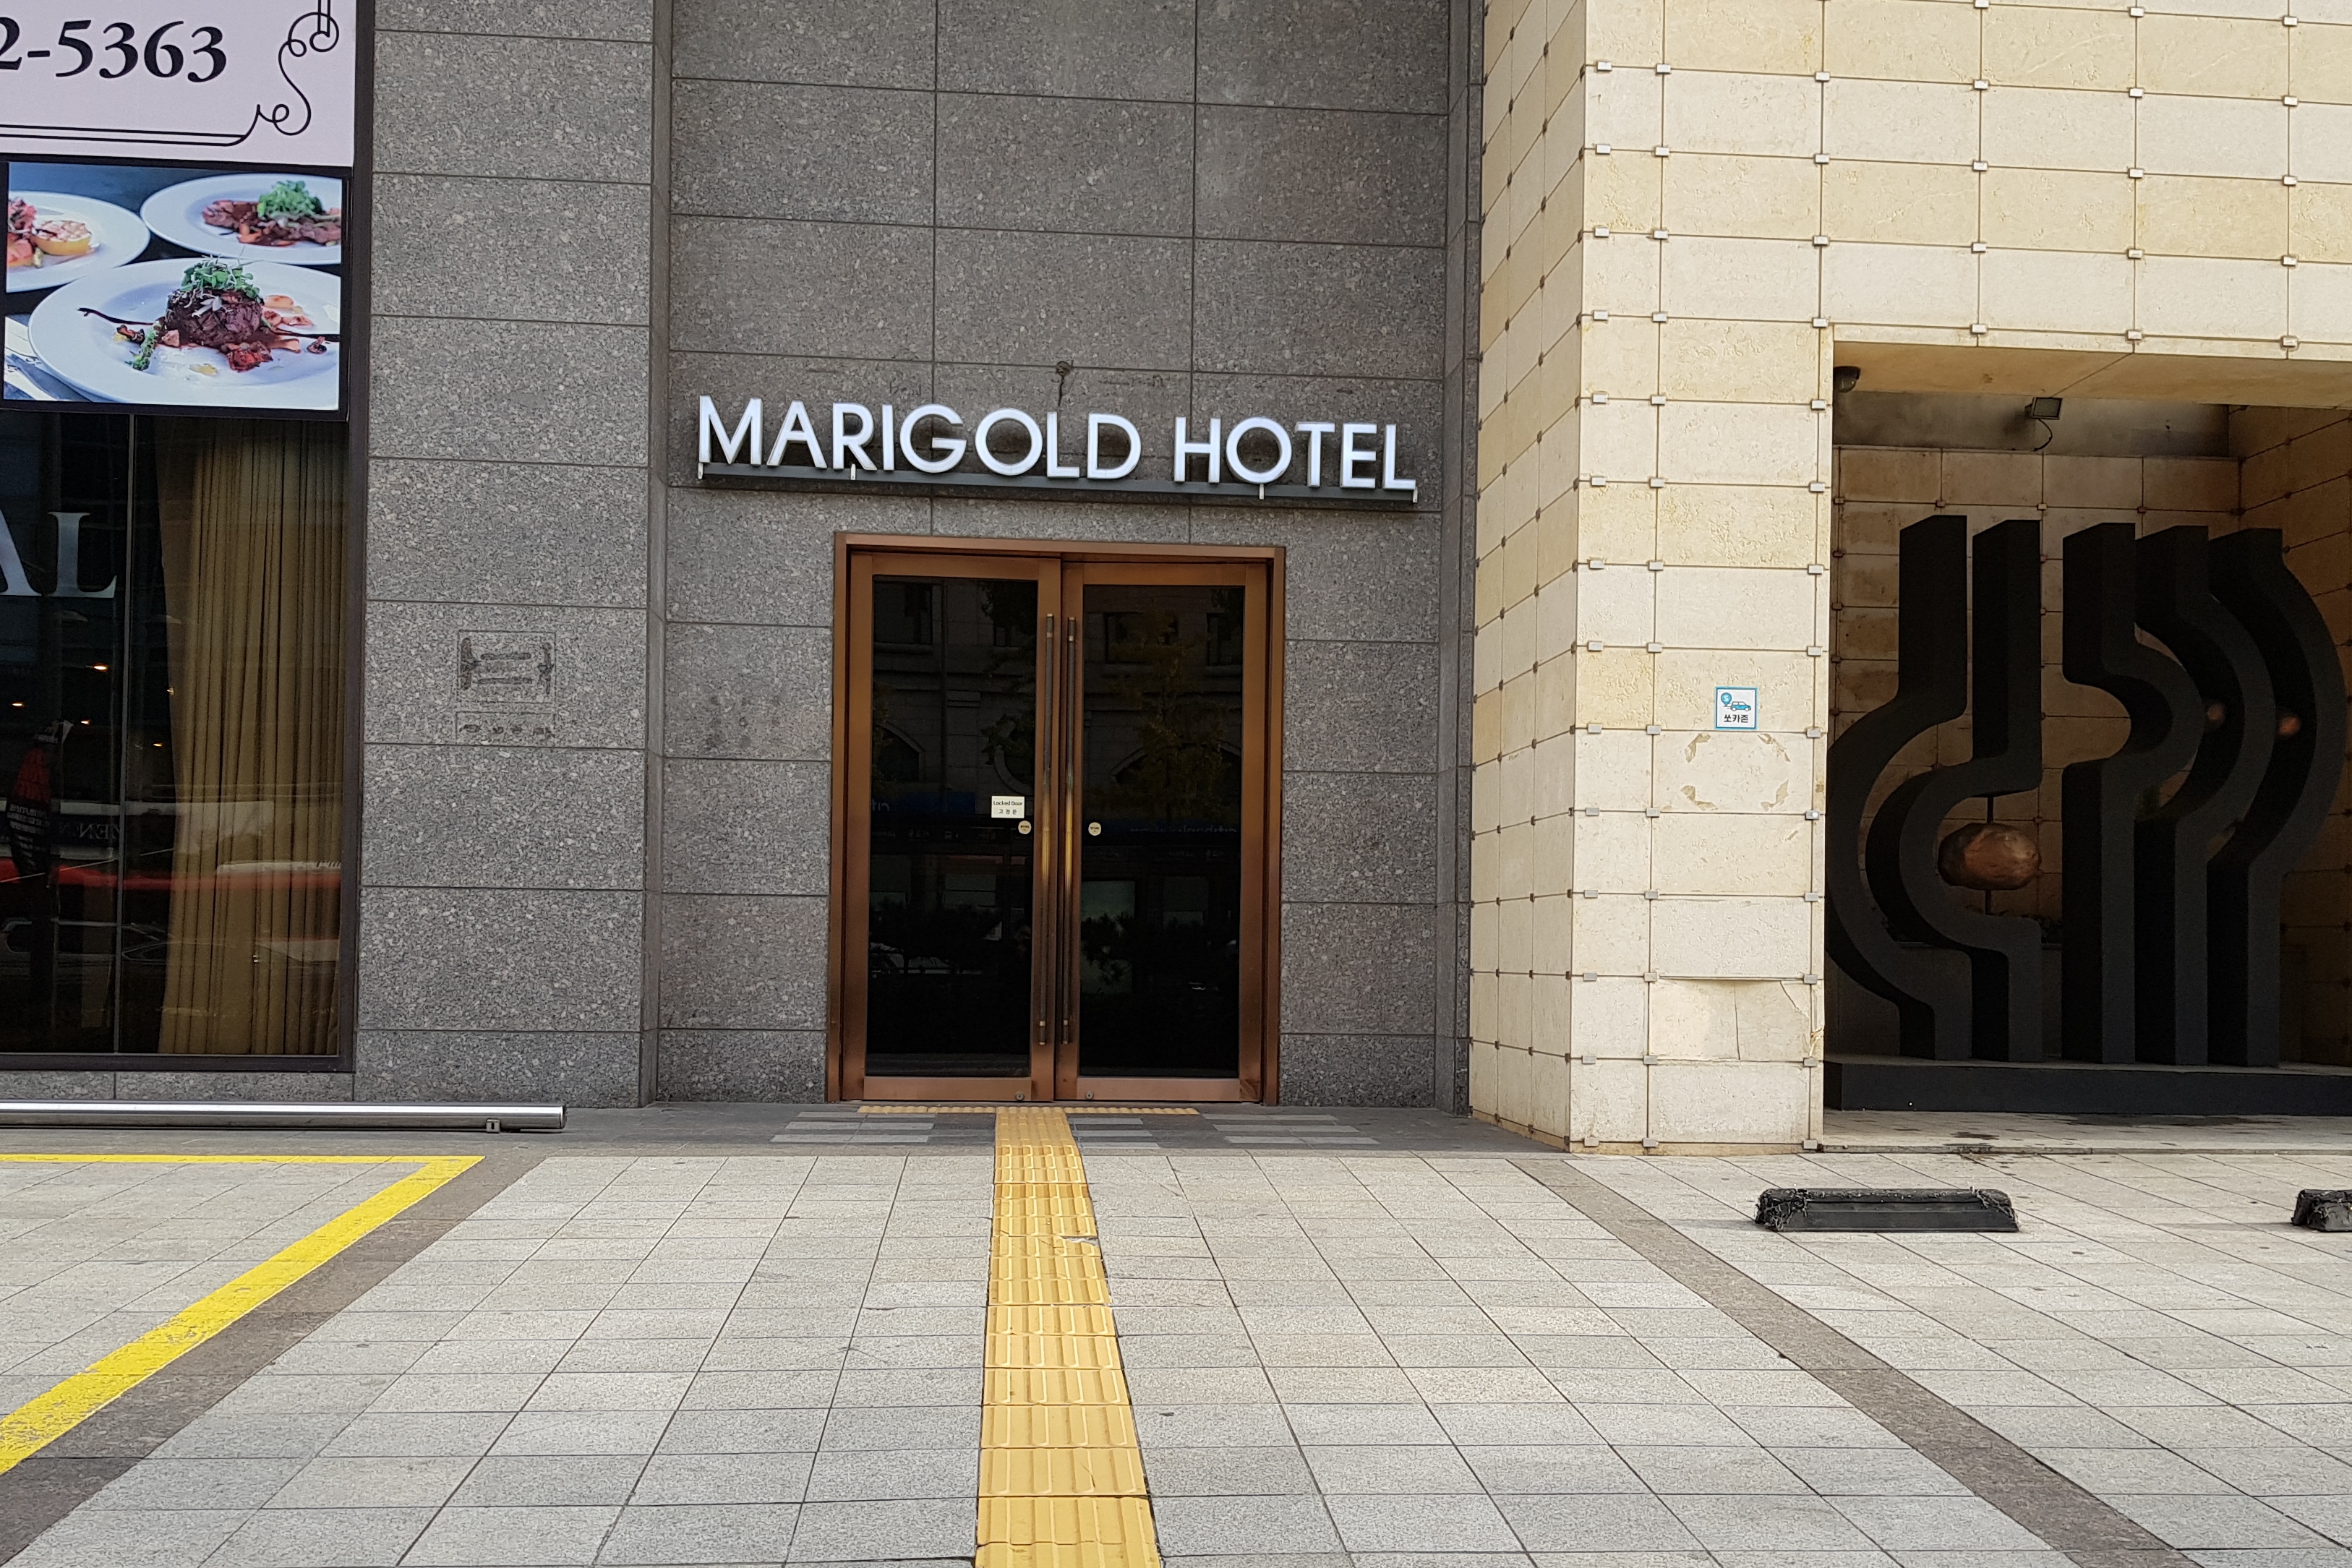 Main entrance0 : Main entrance of the Marigold Hotel with tactile paving
